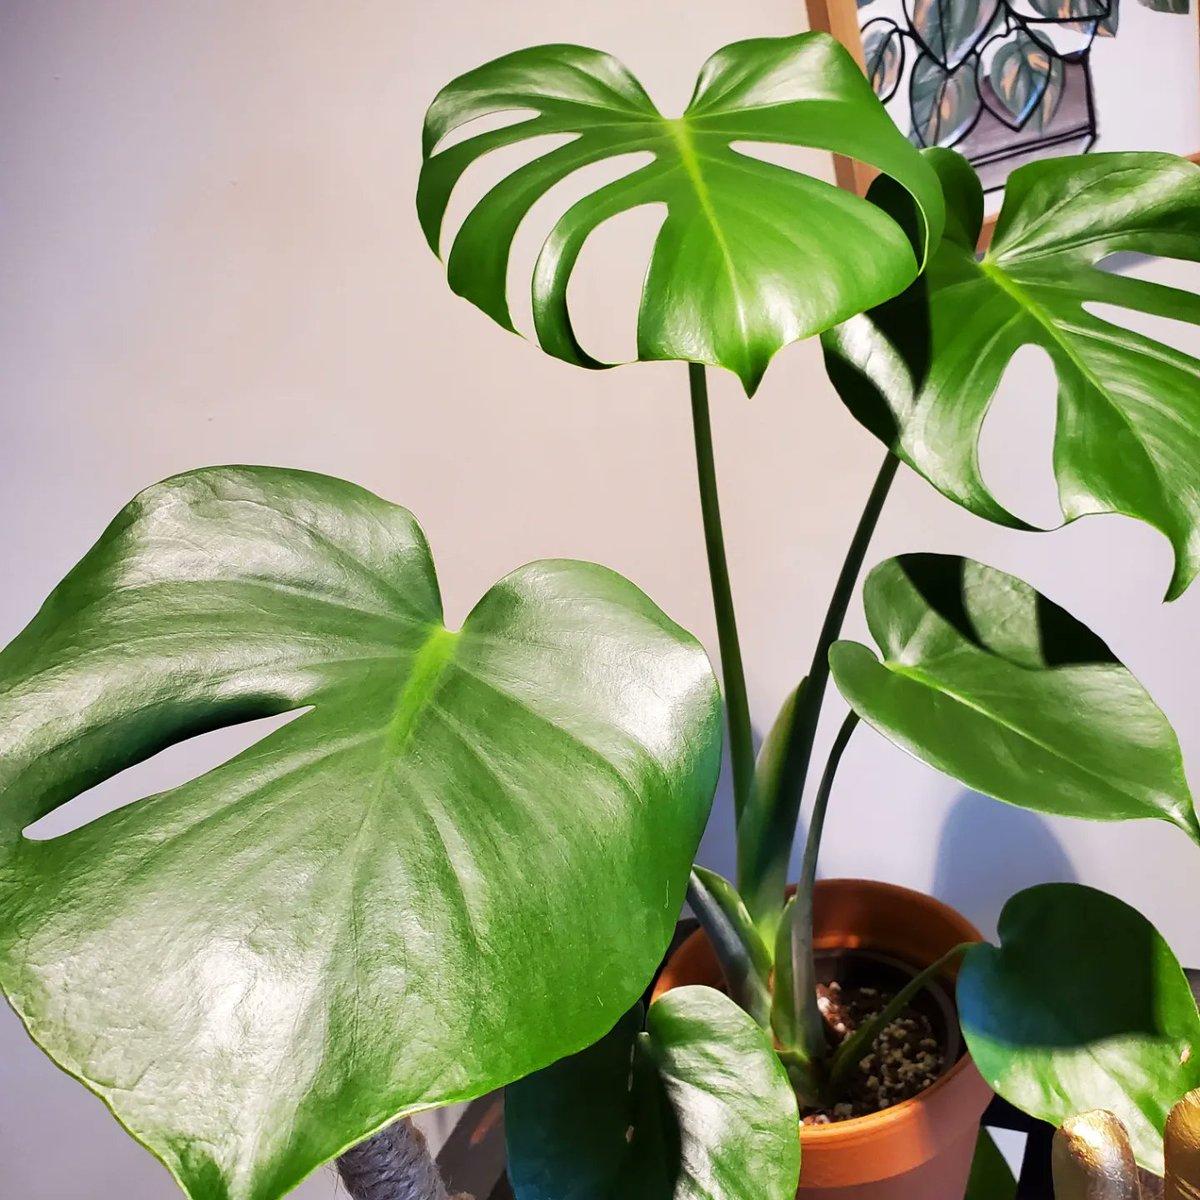 Shined these leaves today! 
#monsteramonday #houseplants